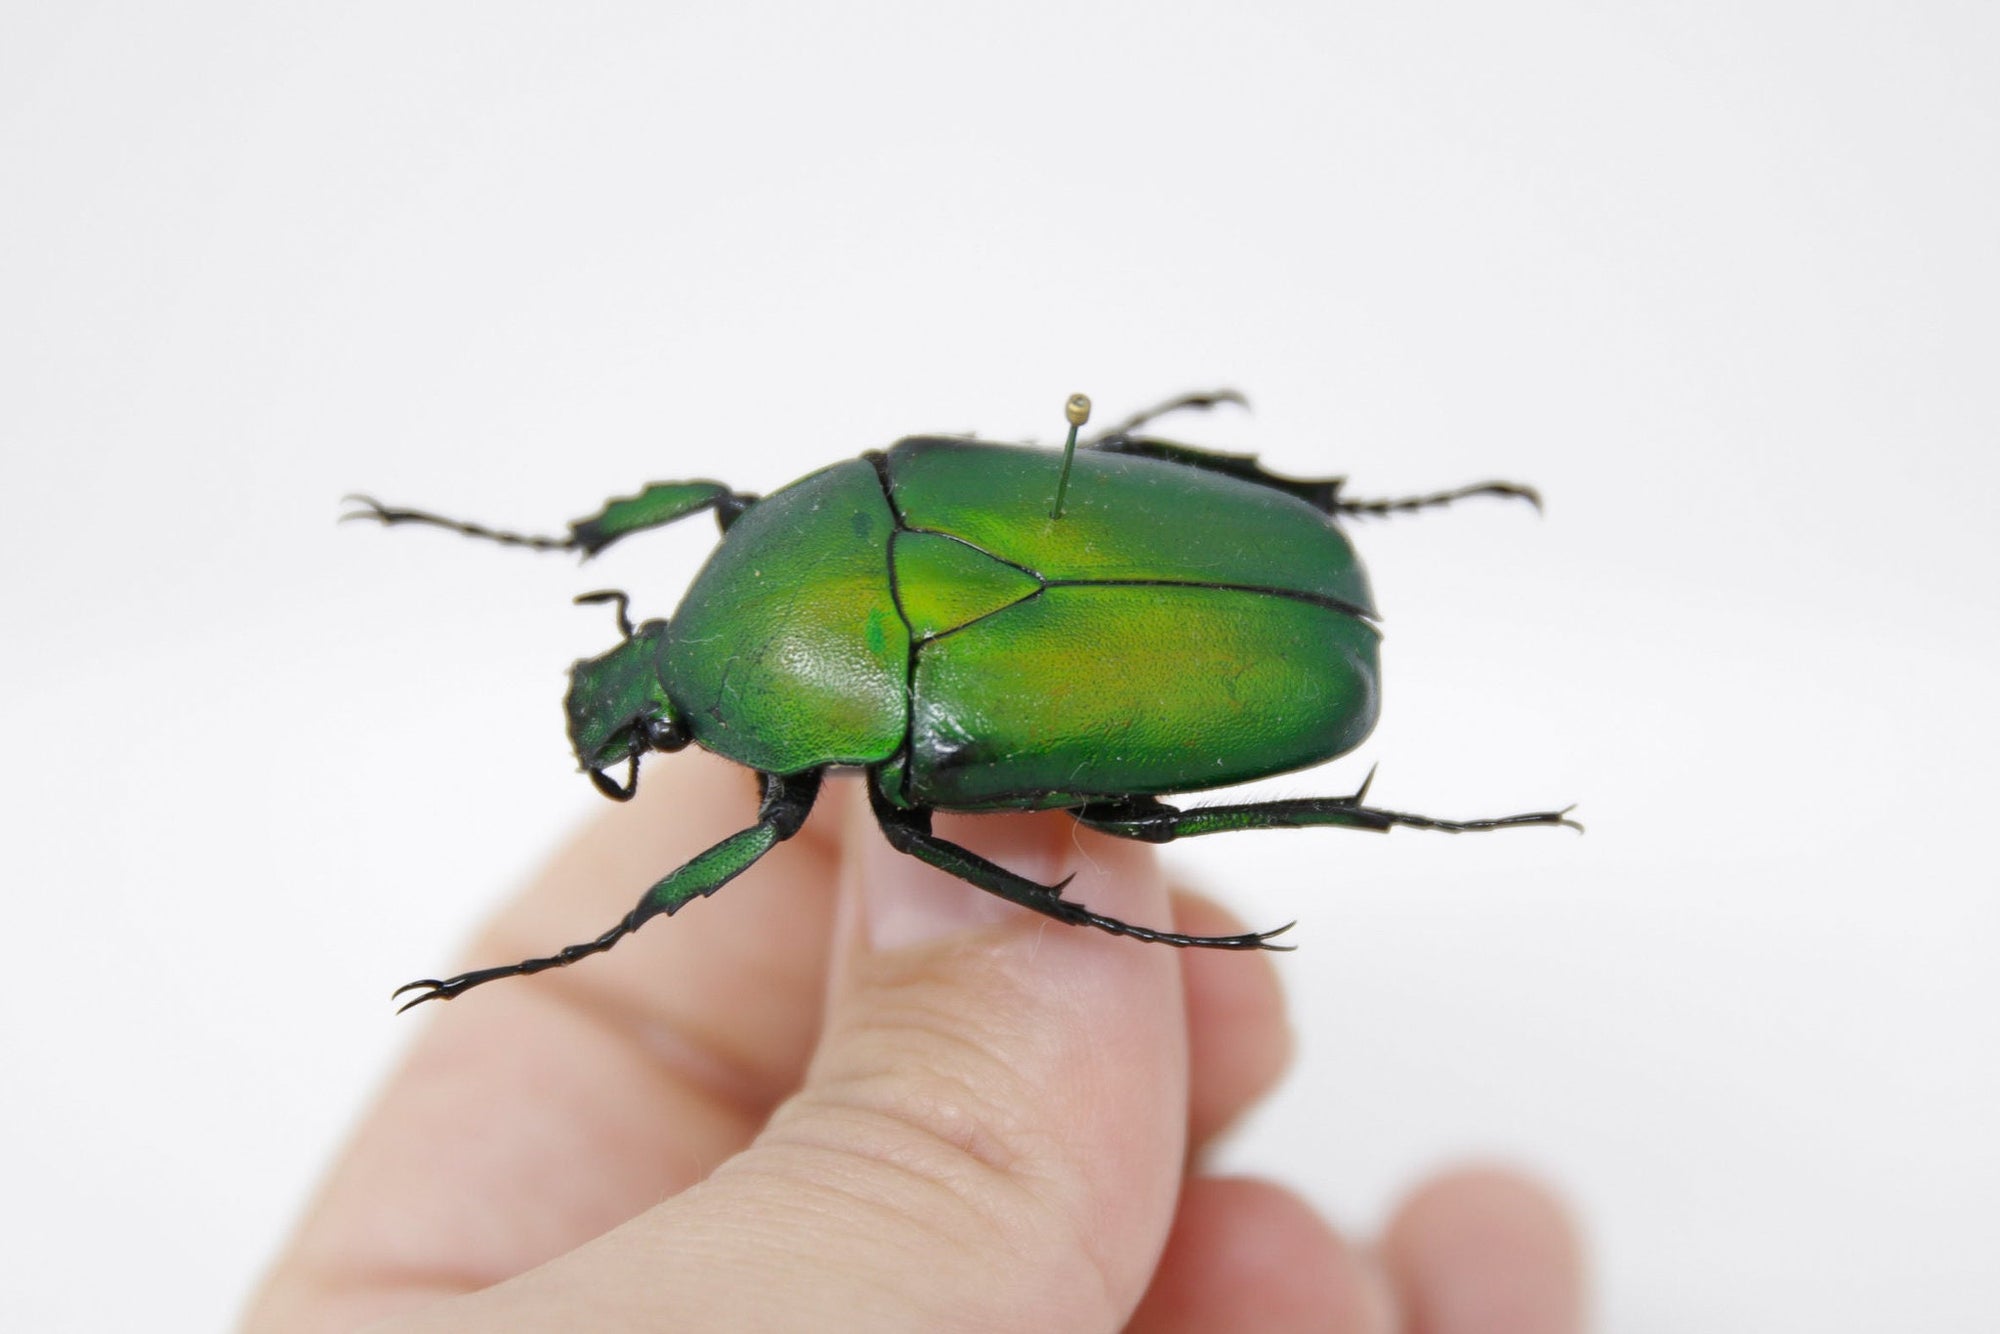 Dicronorhina micans 38.2m, A1 Real Beetle Pinned Set Specimen, Entomology Taxidermy #OC52